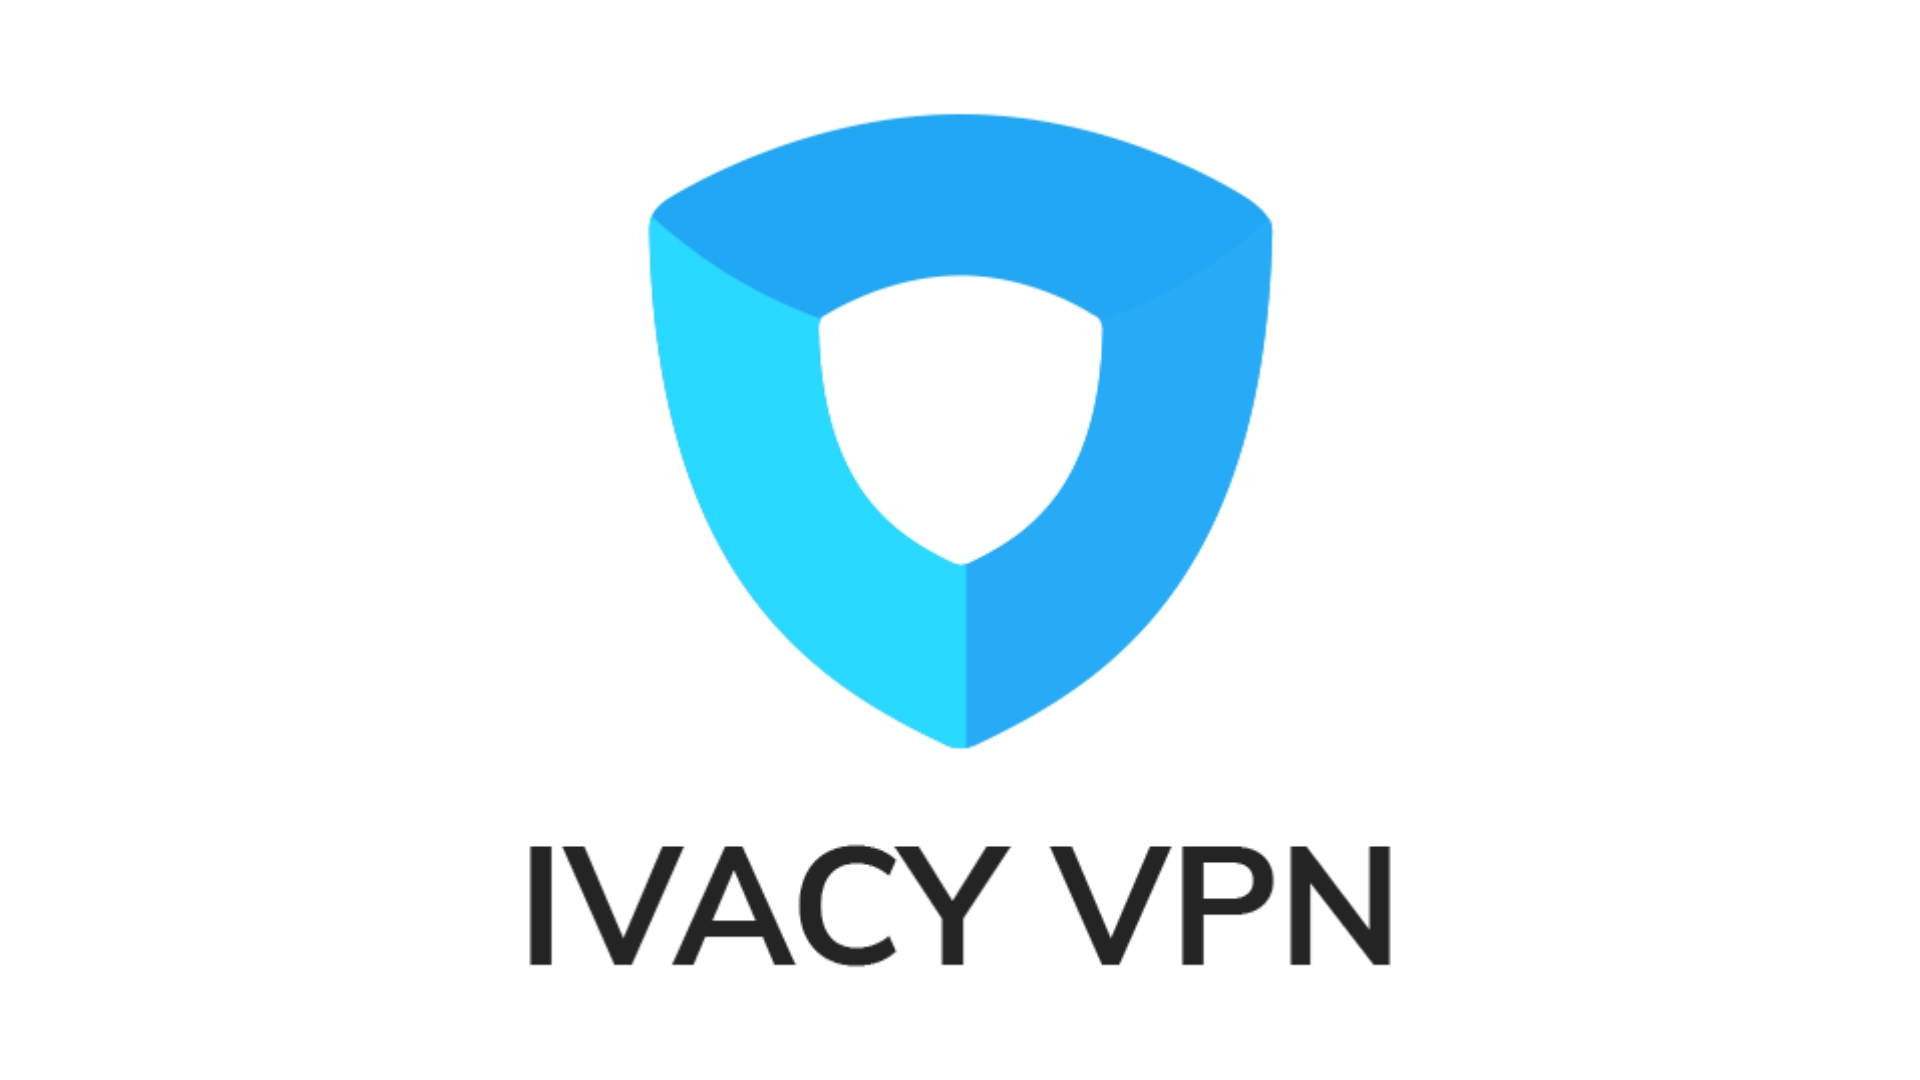 Most secure VPN: Ivacy VPN. Image shows the company logo.